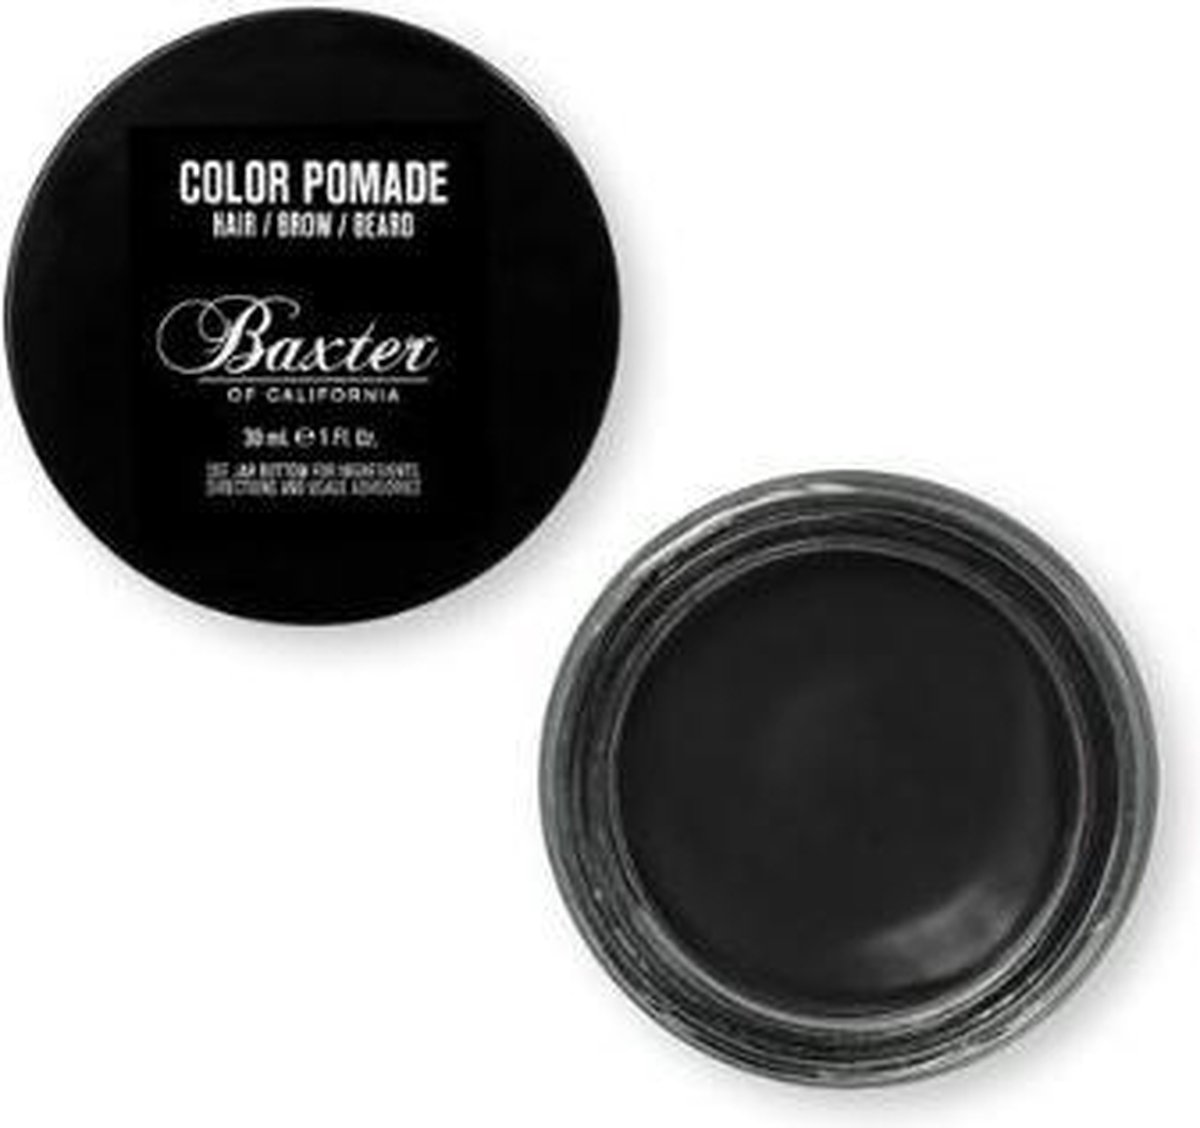 Baxter of California Hair Color Pomade